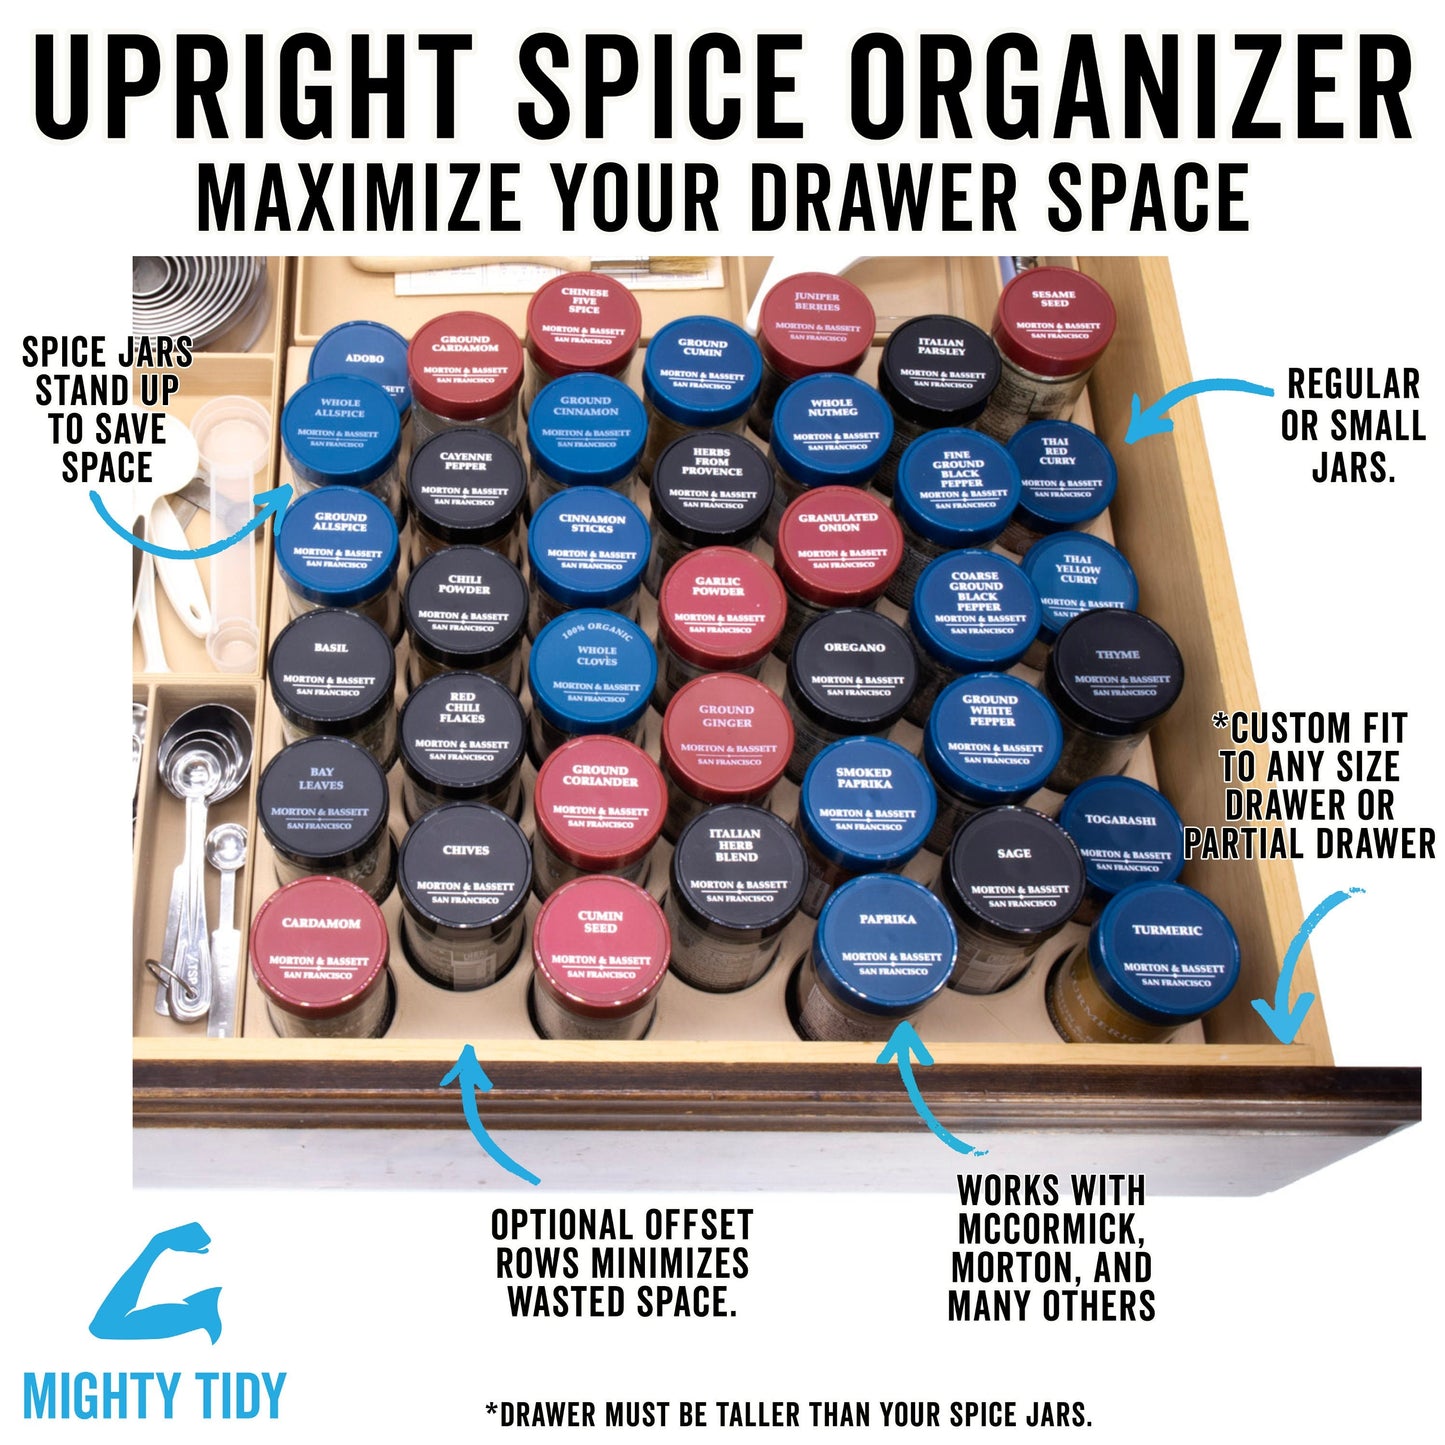 Photo of Upright Spice Organizer partially filling a drawer with Morton & Basset spice jars. Captions read "Spice Jars Stand Up to Save Space", "Regular or Small Jars", "Custom Fit to Any Size Drawer", "Drawer Must be Taller Than Your Spice Jars".